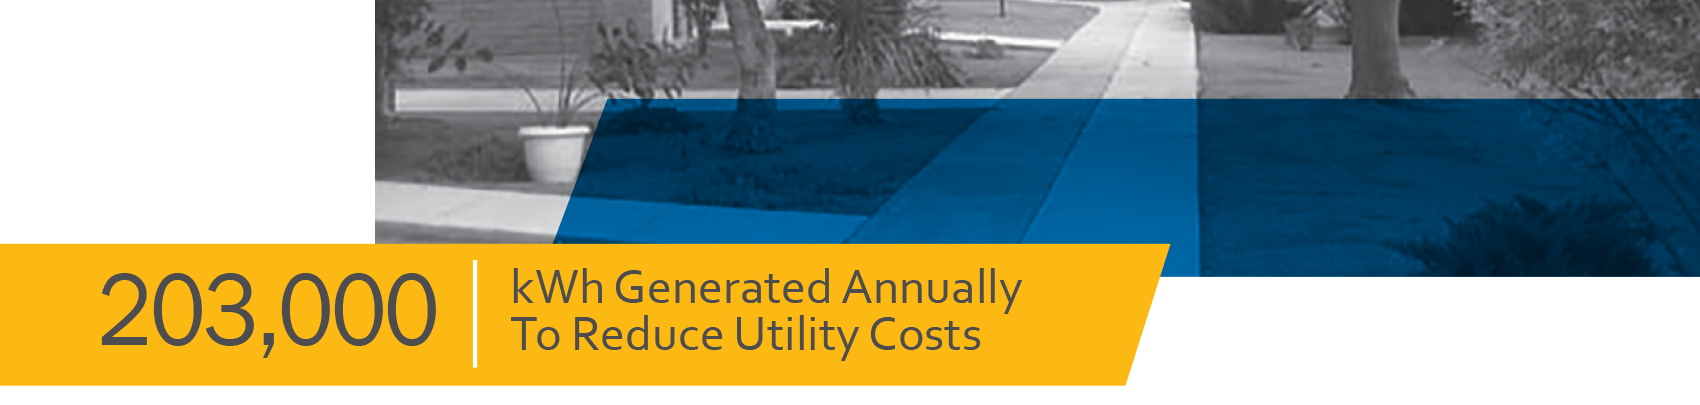 203,000 kWh Generated Annually To Reduce Utility Costs